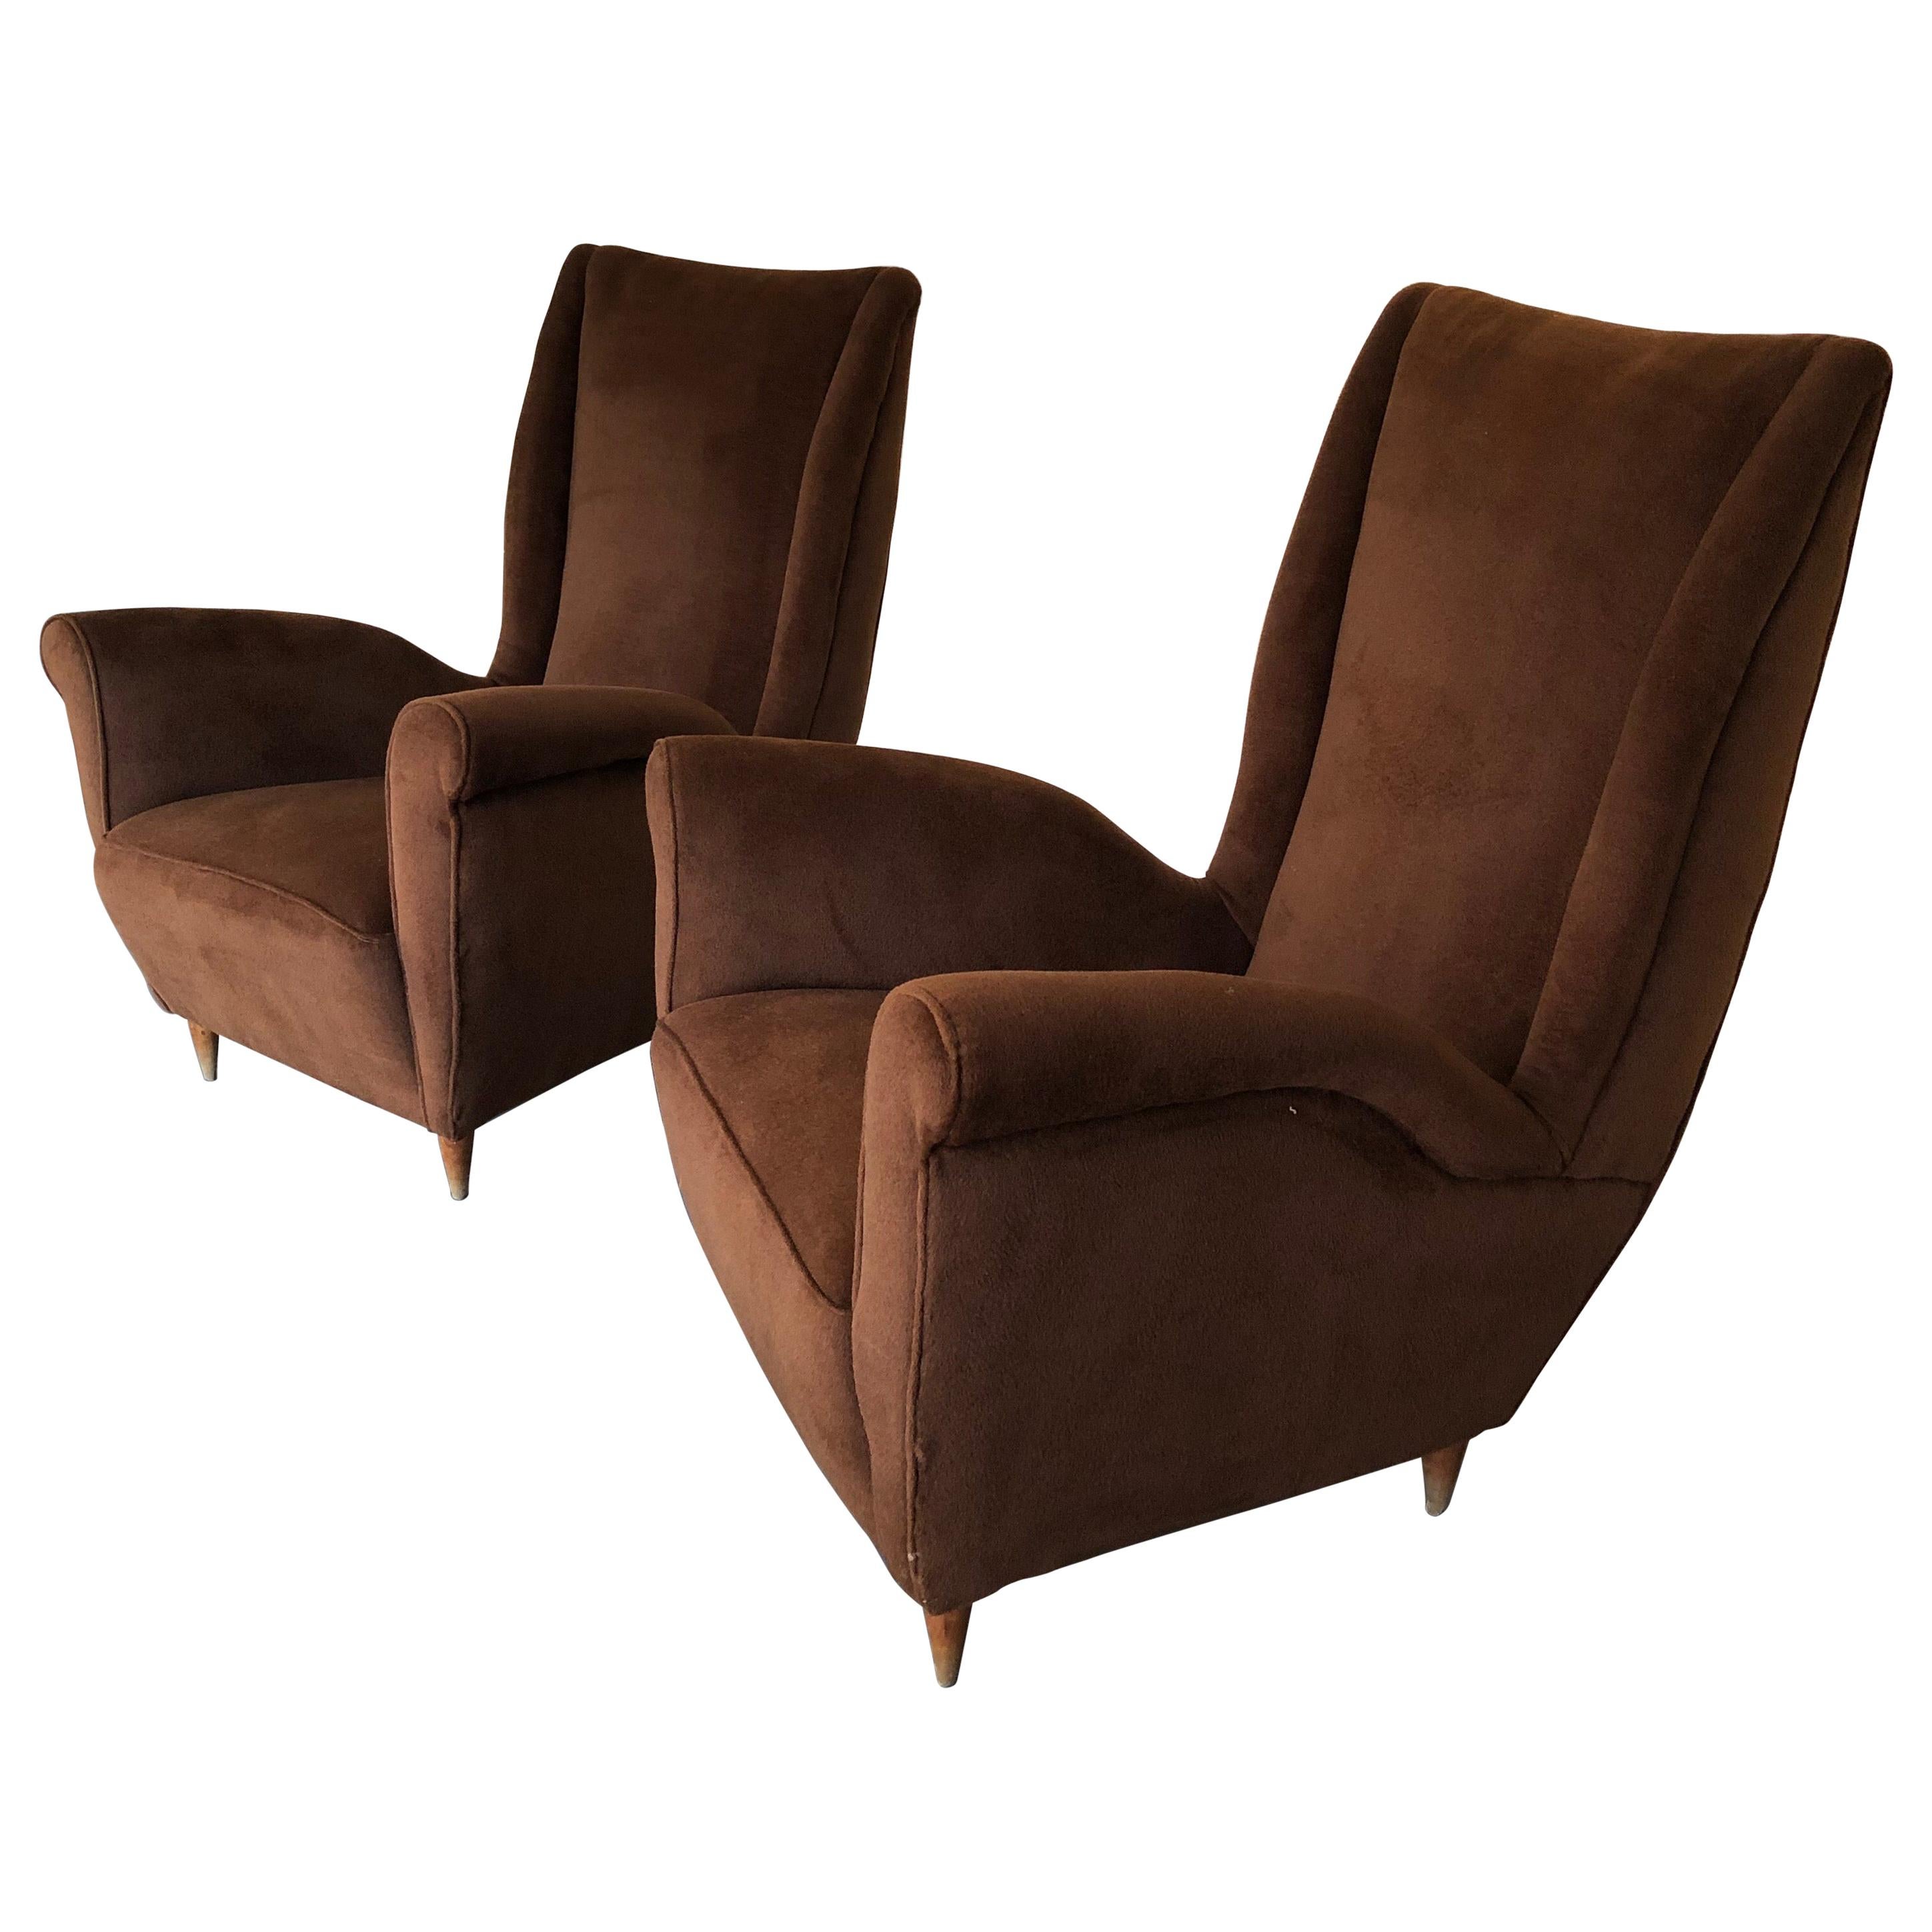 Brown velvet Vintage Italian Armchairs by Gio Ponti, 1950s, Set of 2 For Sale